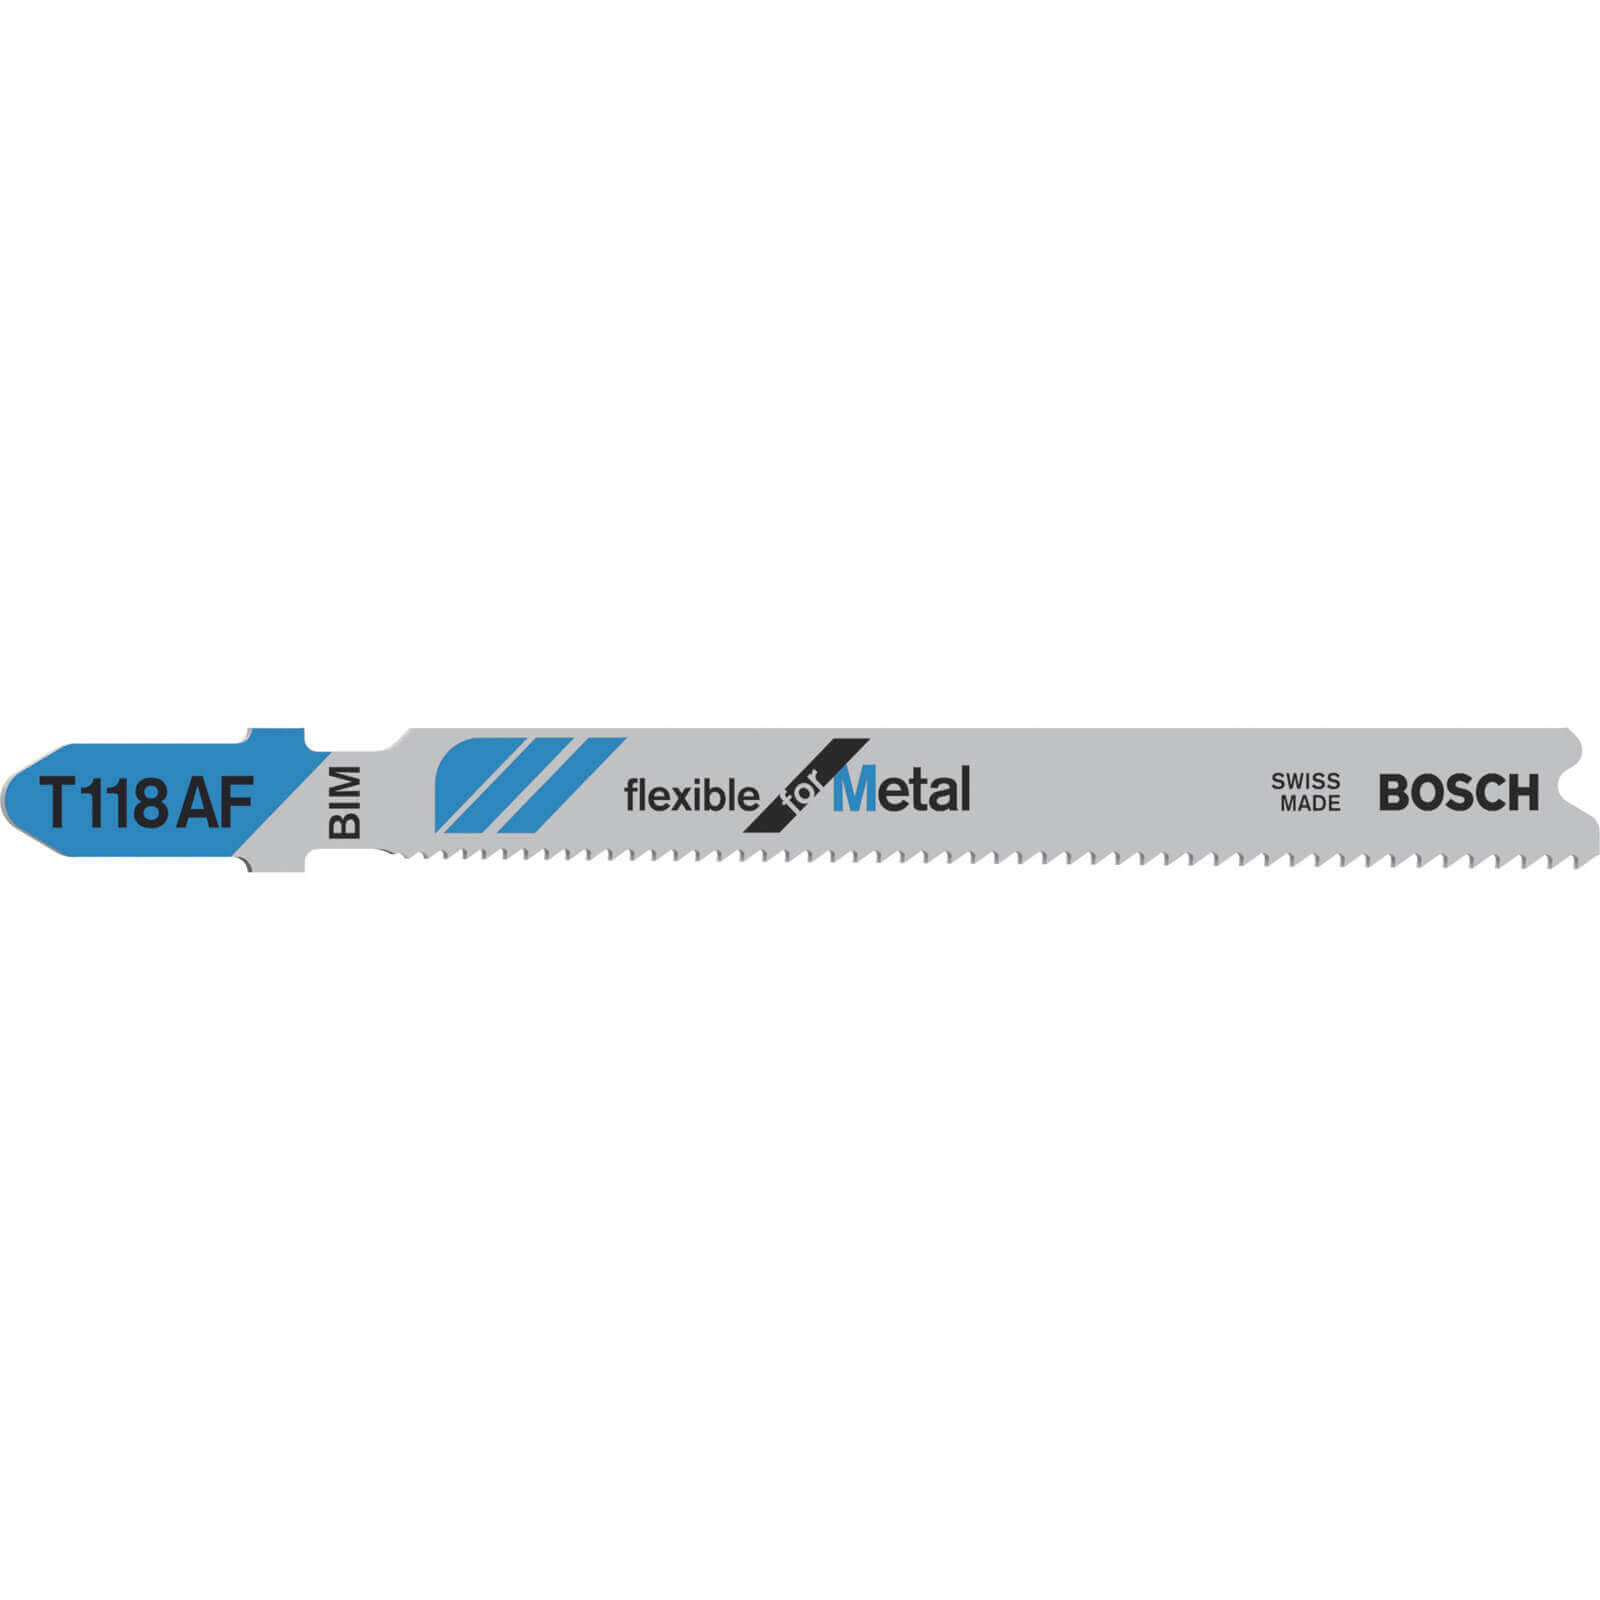 Image of Bosch T118 AF Metal Cutting Jigsaw Blades Pack of 5